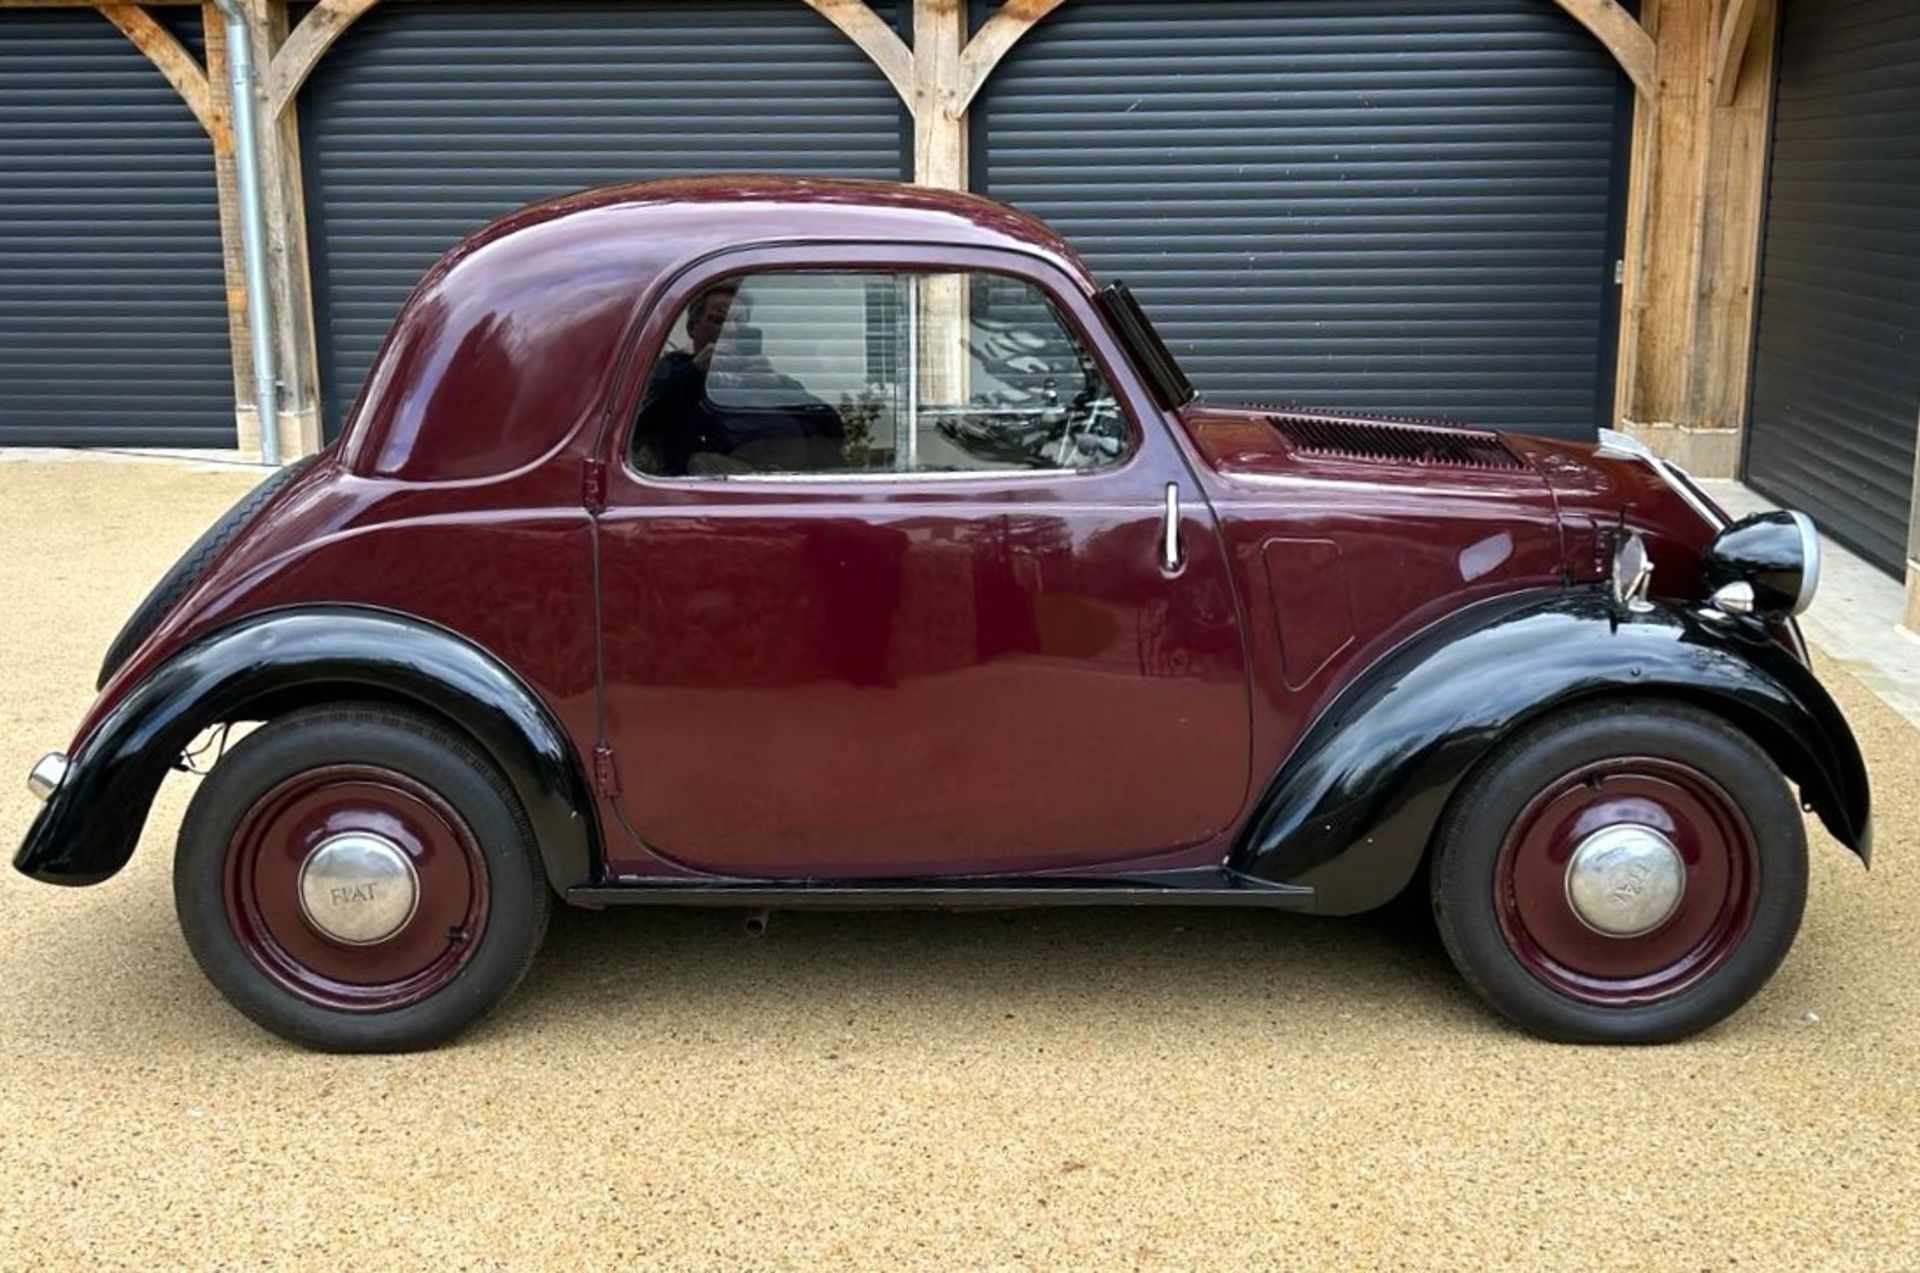 1937 FIAT TOPOLINO Registration Number: TBA Chassis Number: 516289 Recorded Mileage: 46,700 - Image 2 of 13